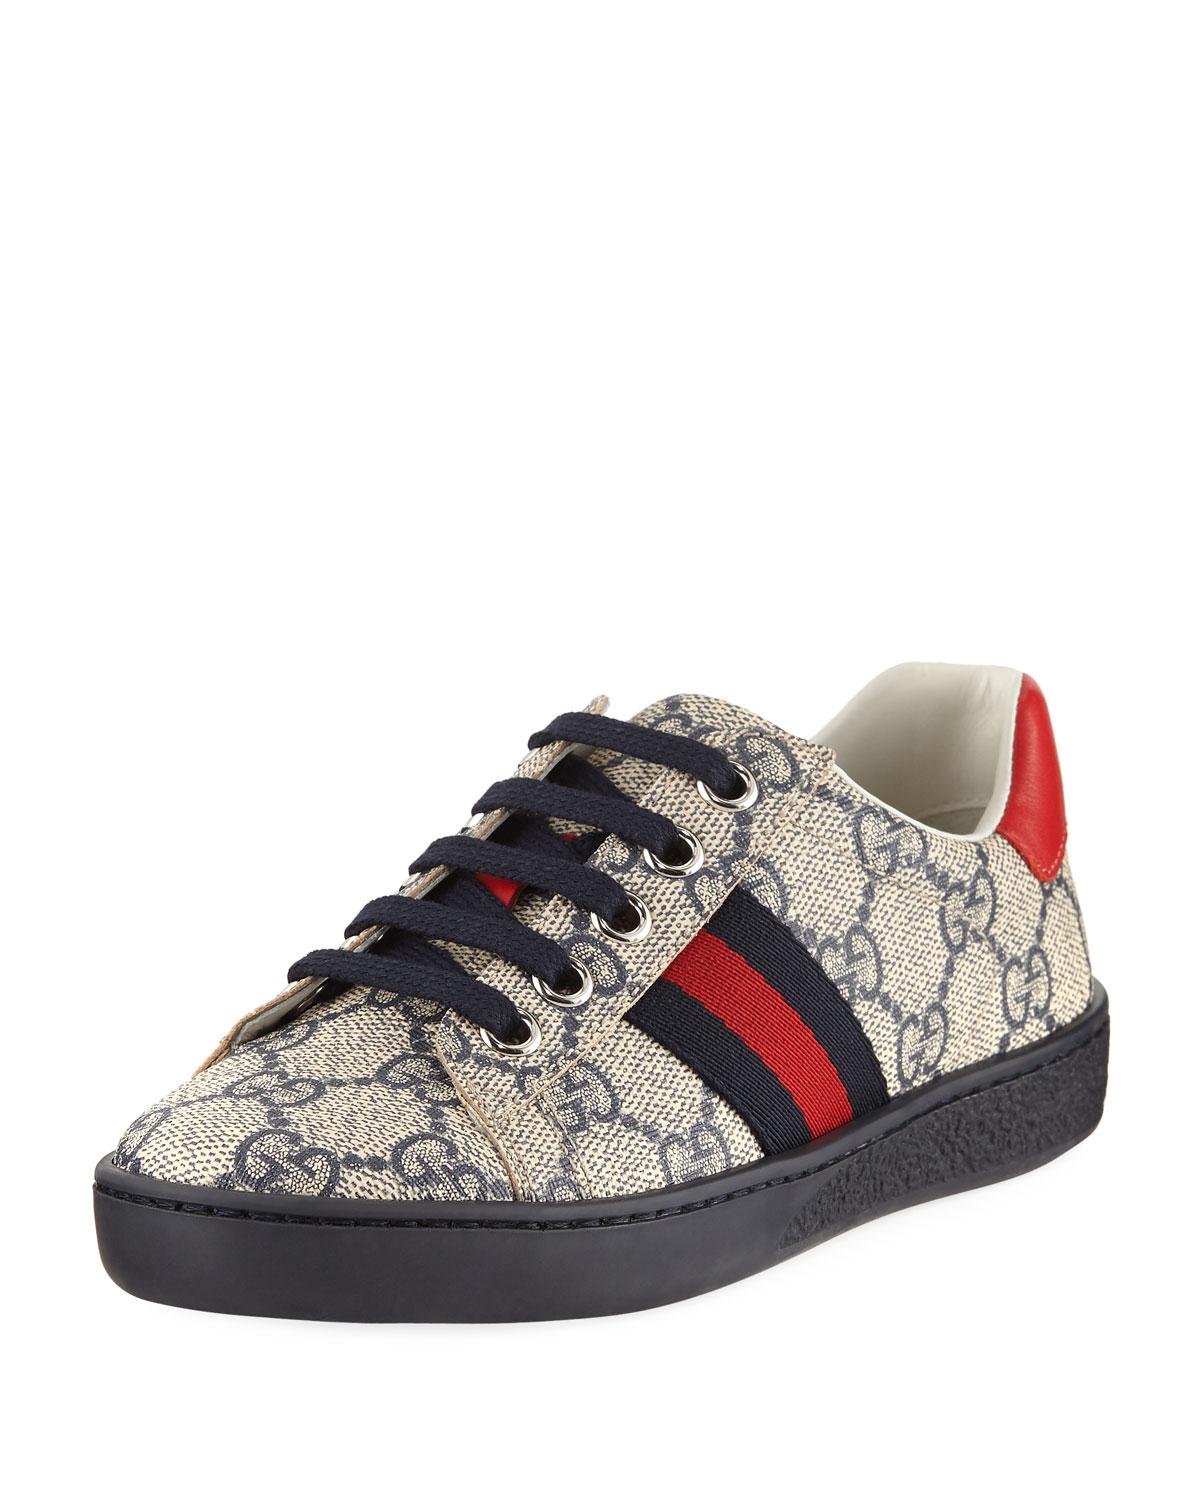 Gucci Canvas New Ace Gg Tennis Shoe for Men - Lyst